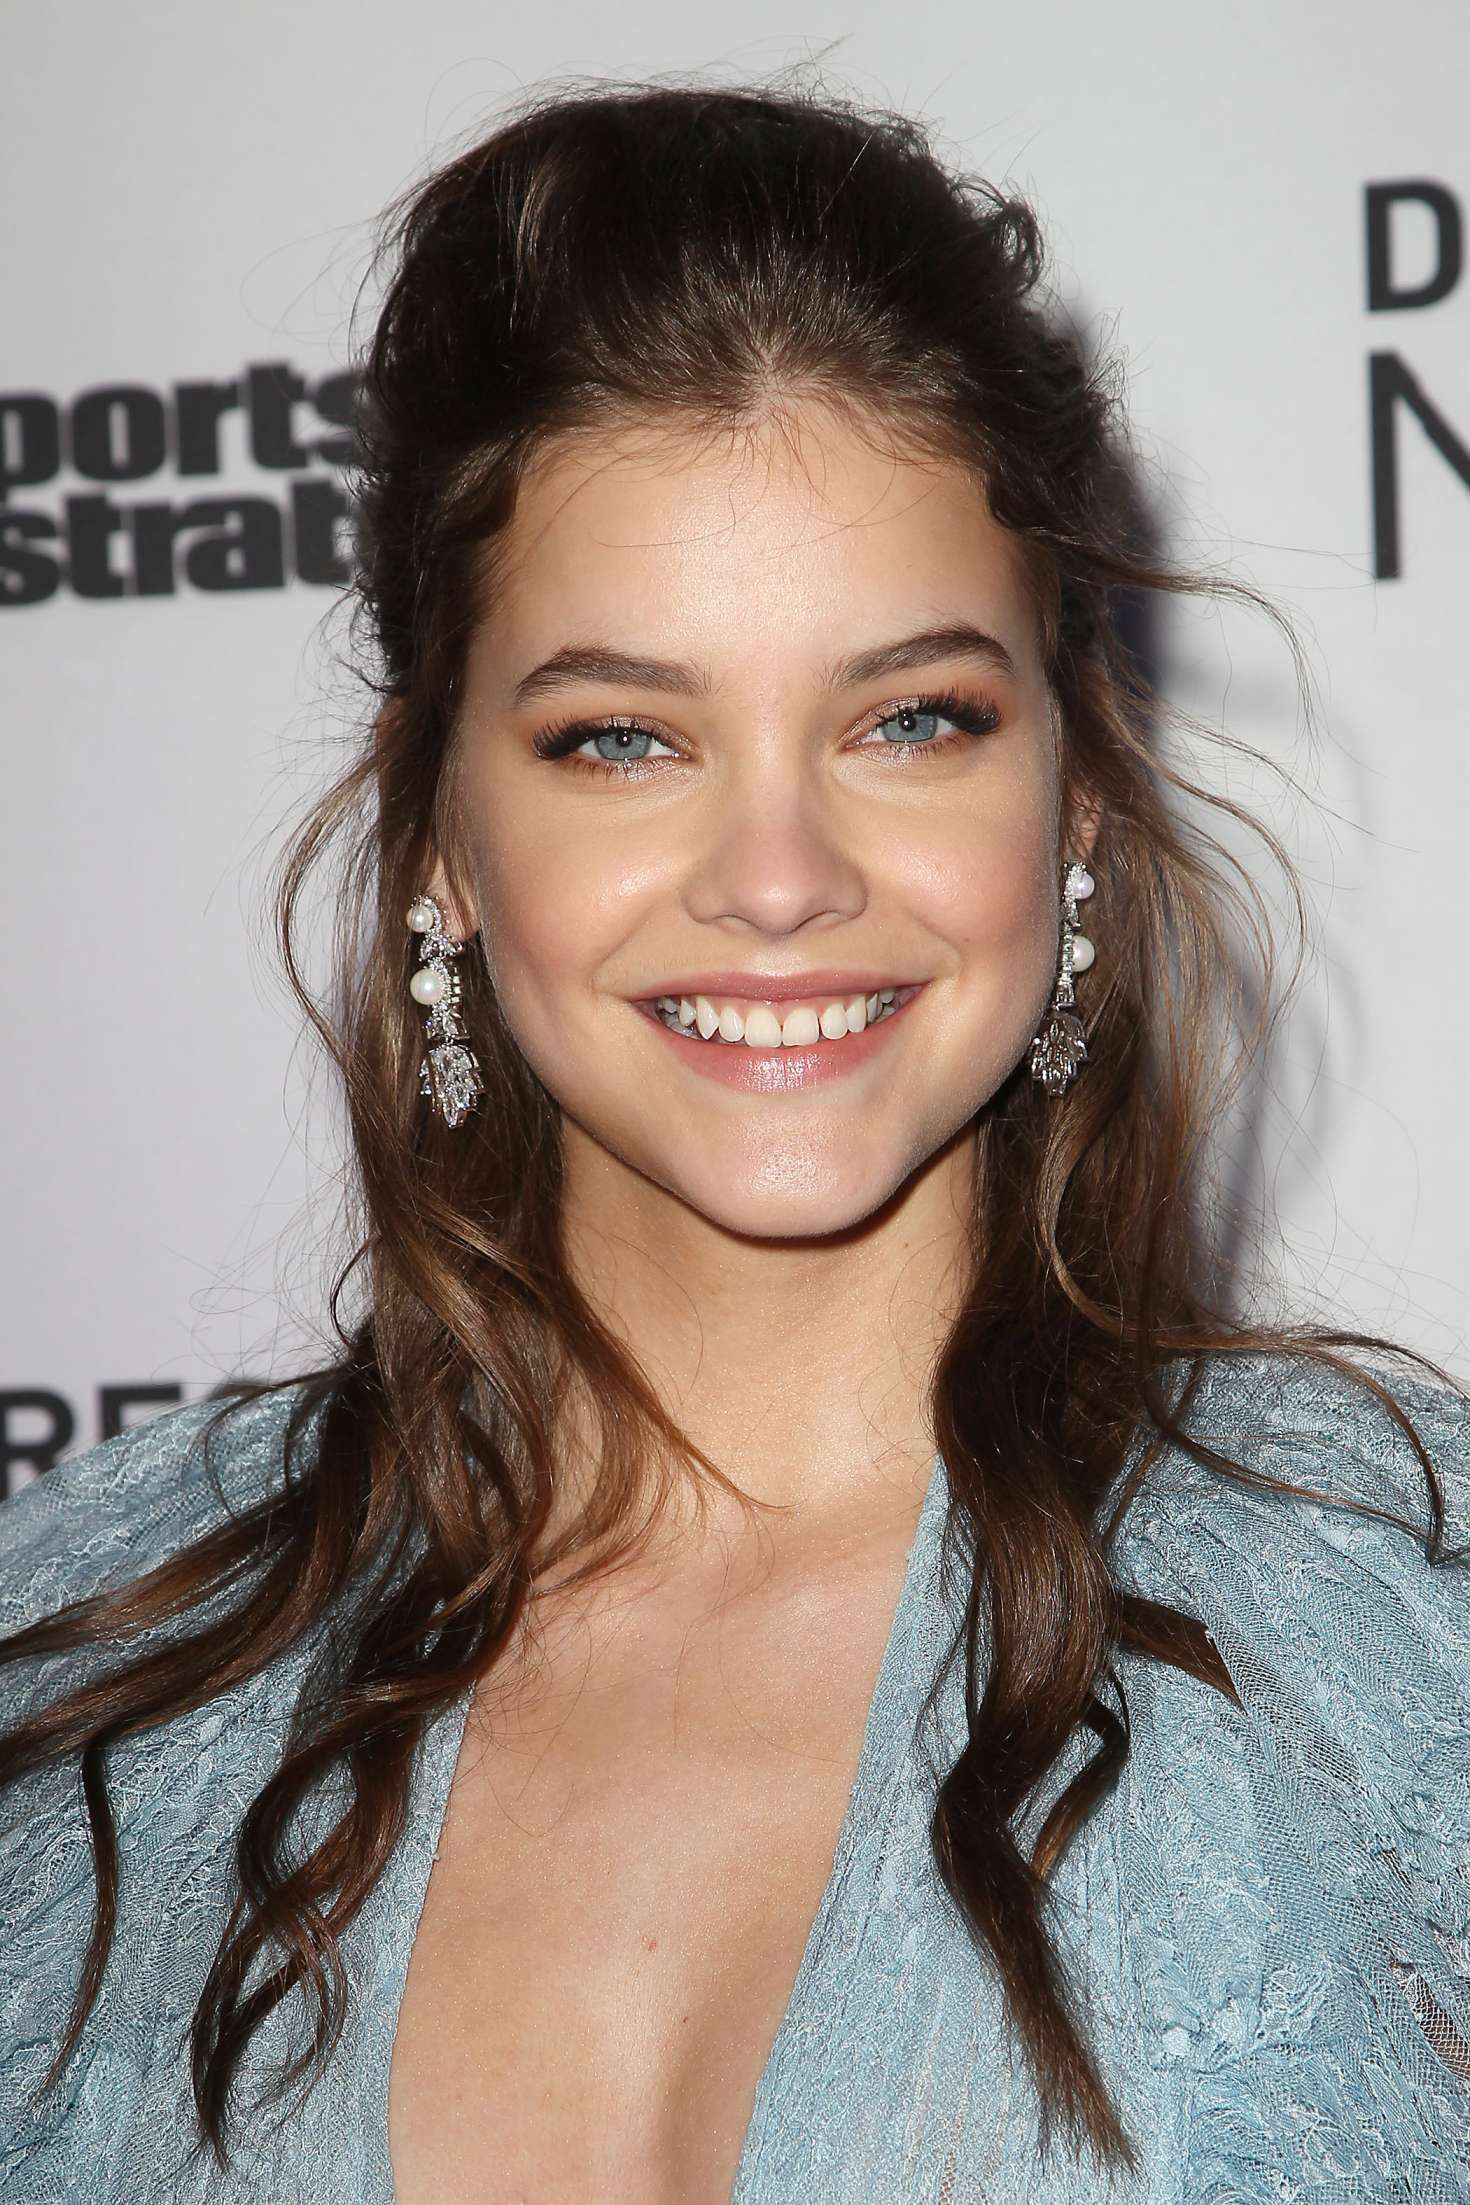 Barbara Palvin: Sports Illustrated Swimsuit Edition Launch Event -02 ...